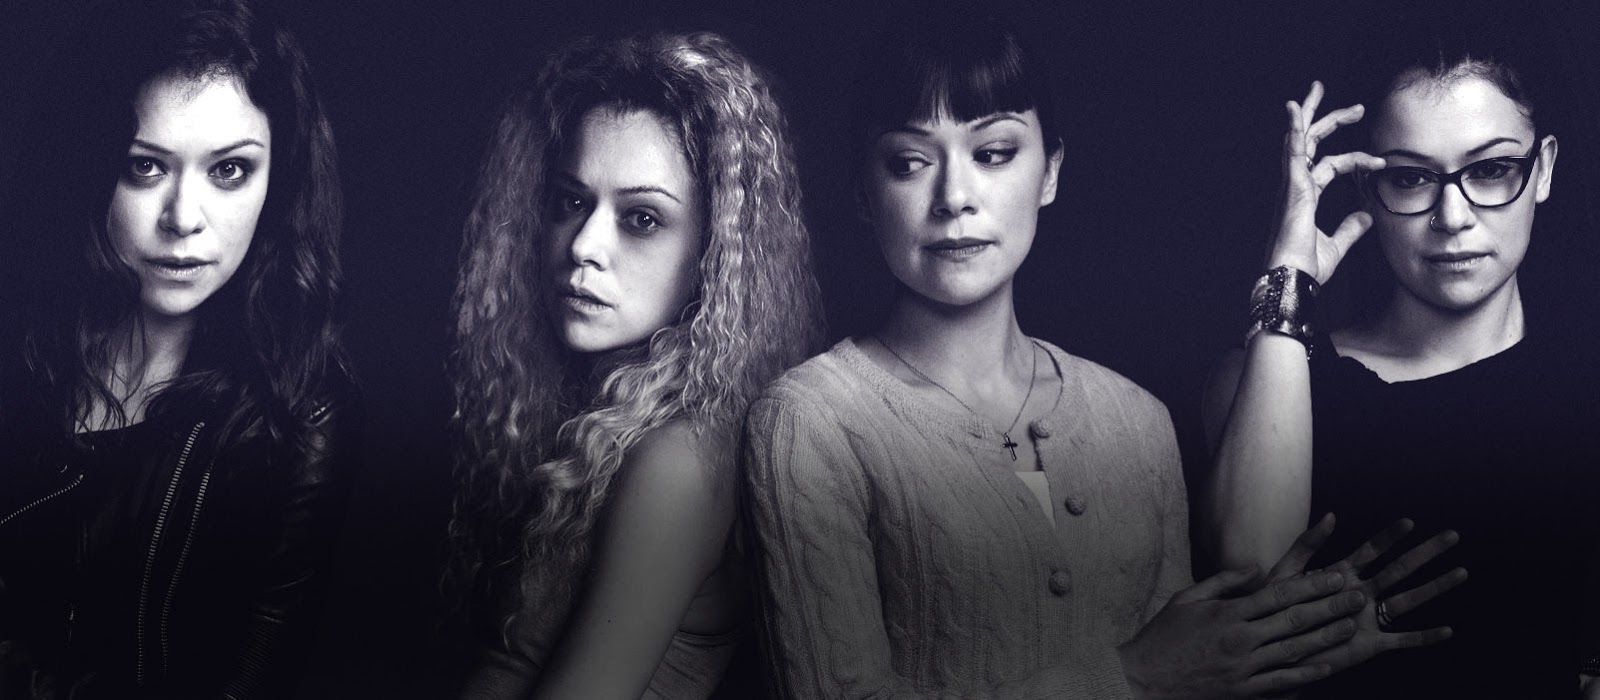 Scad Photography Department News Orphan Black Poster Contest